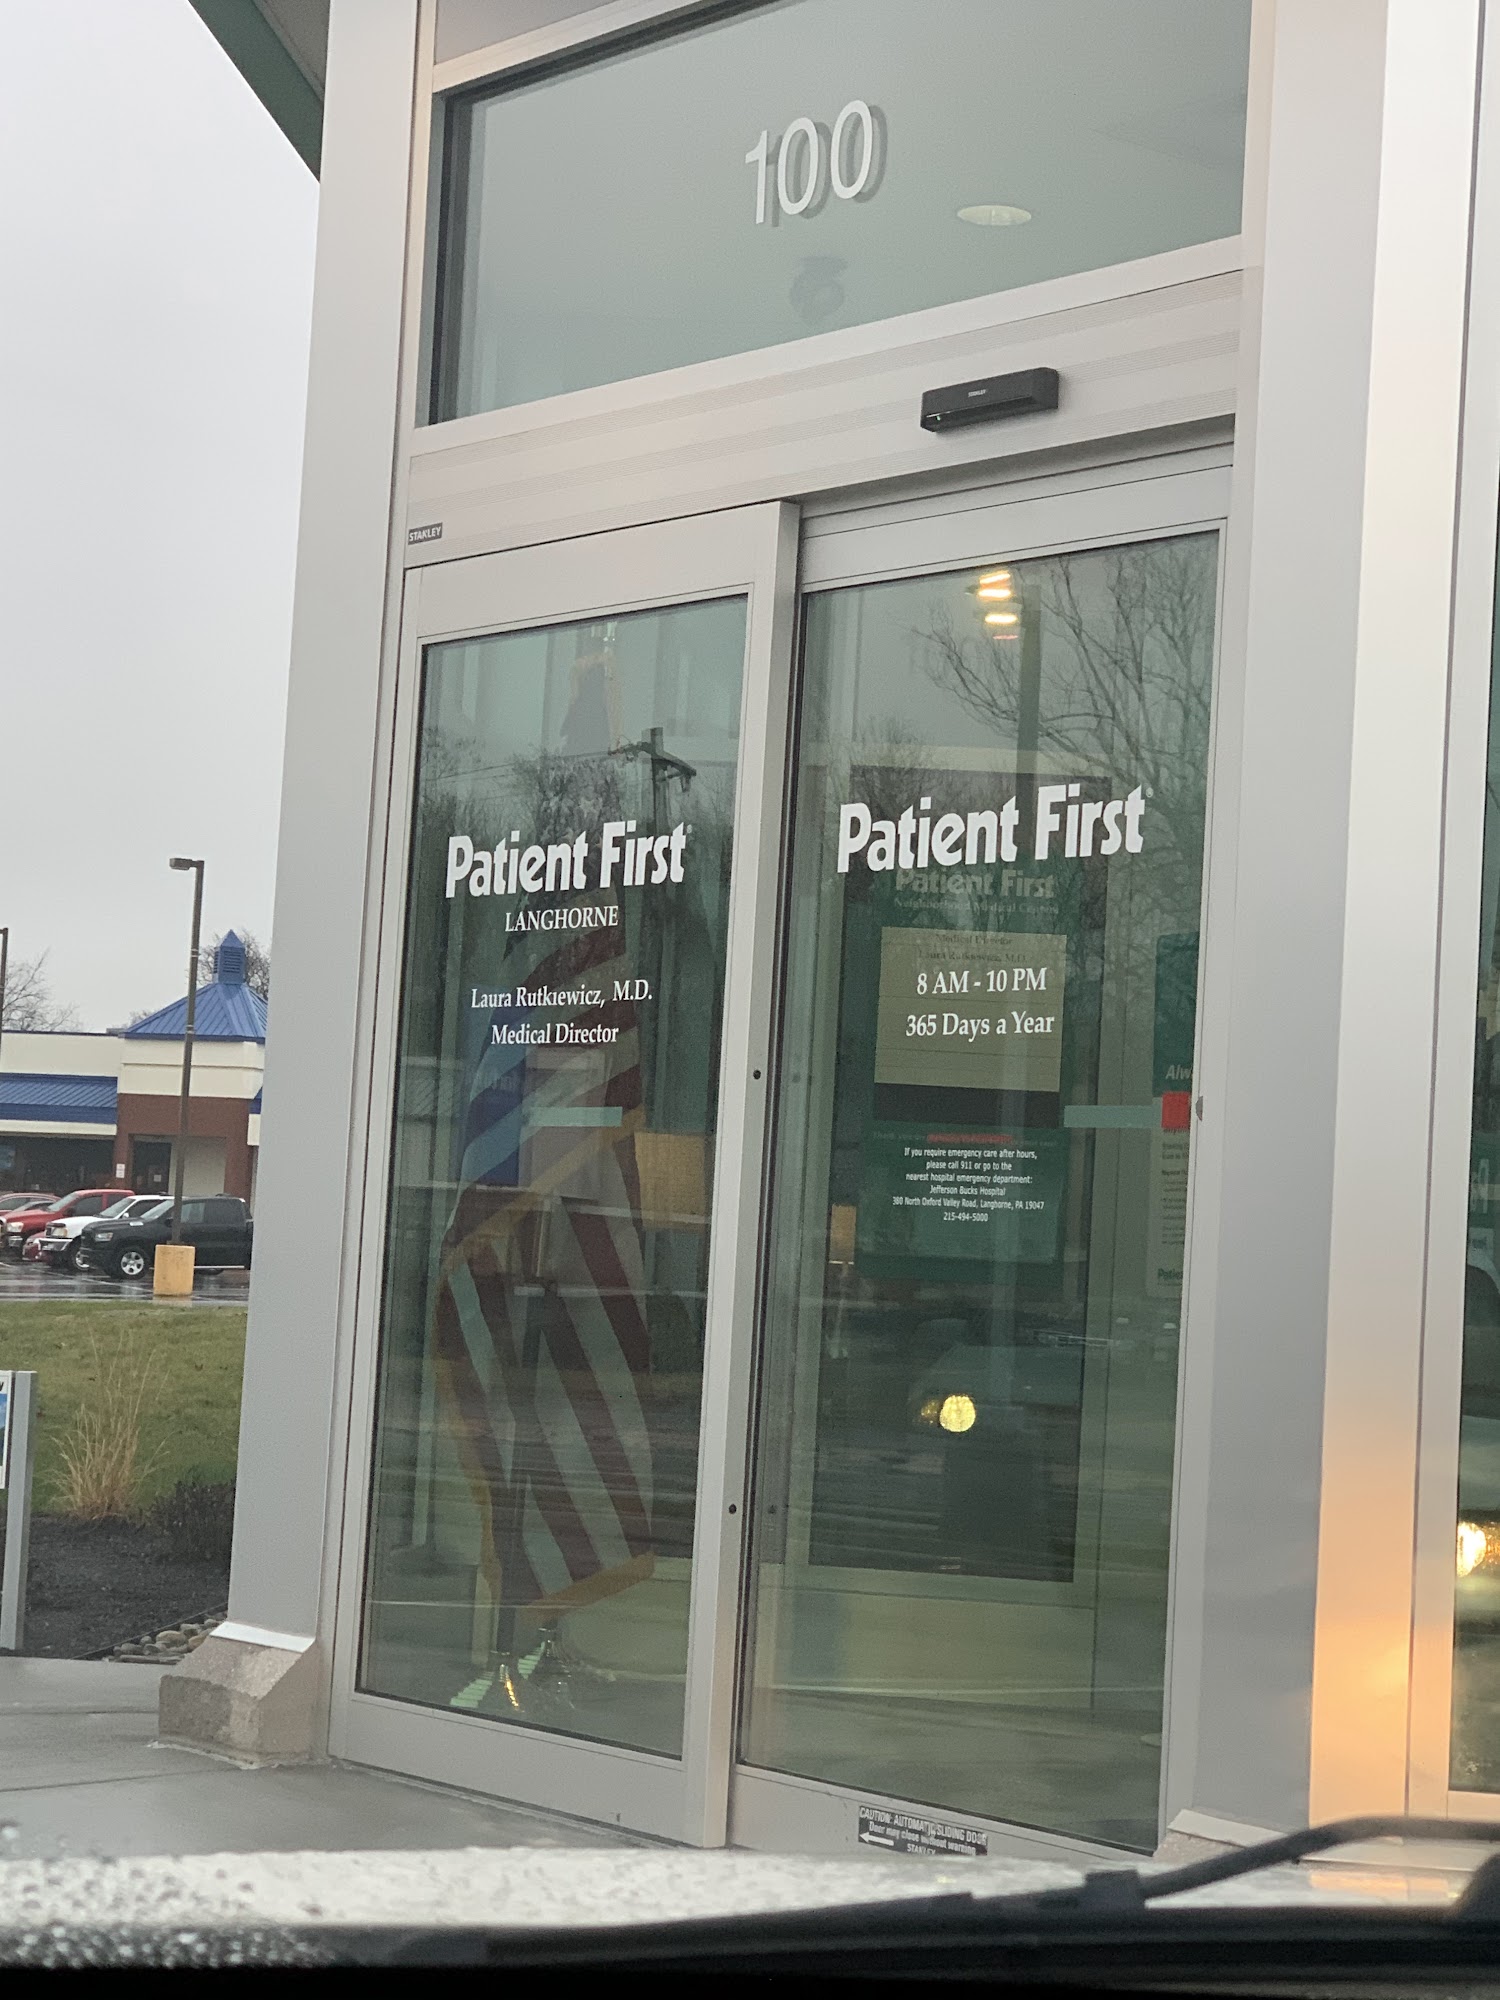 Patient First Primary and Urgent Care - Langhorne 100 Lincoln Hwy, Fairless Hills Pennsylvania 19030